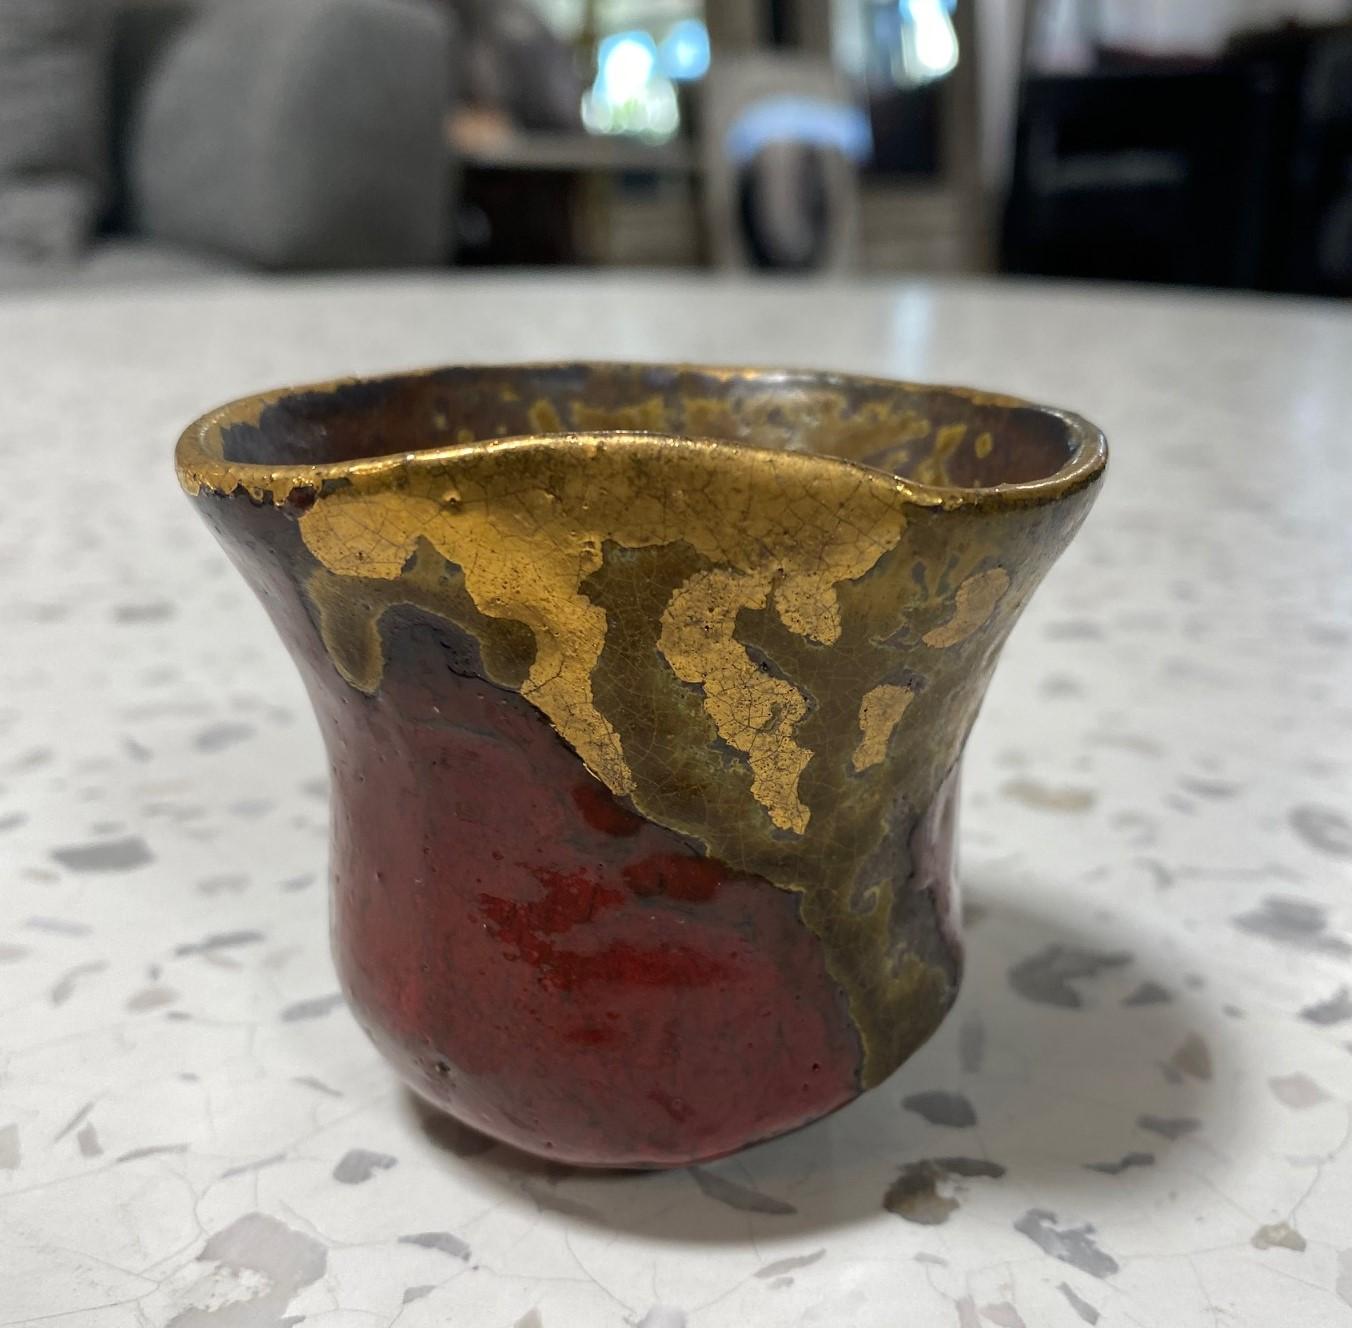 A gorgeous Japanese studio pottery Yunomi teacup or sake cup that features a wonderful sumptuous crimson red glaze with dripping gold gilt glaze and various shifts in color and texture. 

This particular Yunomi encompasses the Japanese Wabi-Sabi